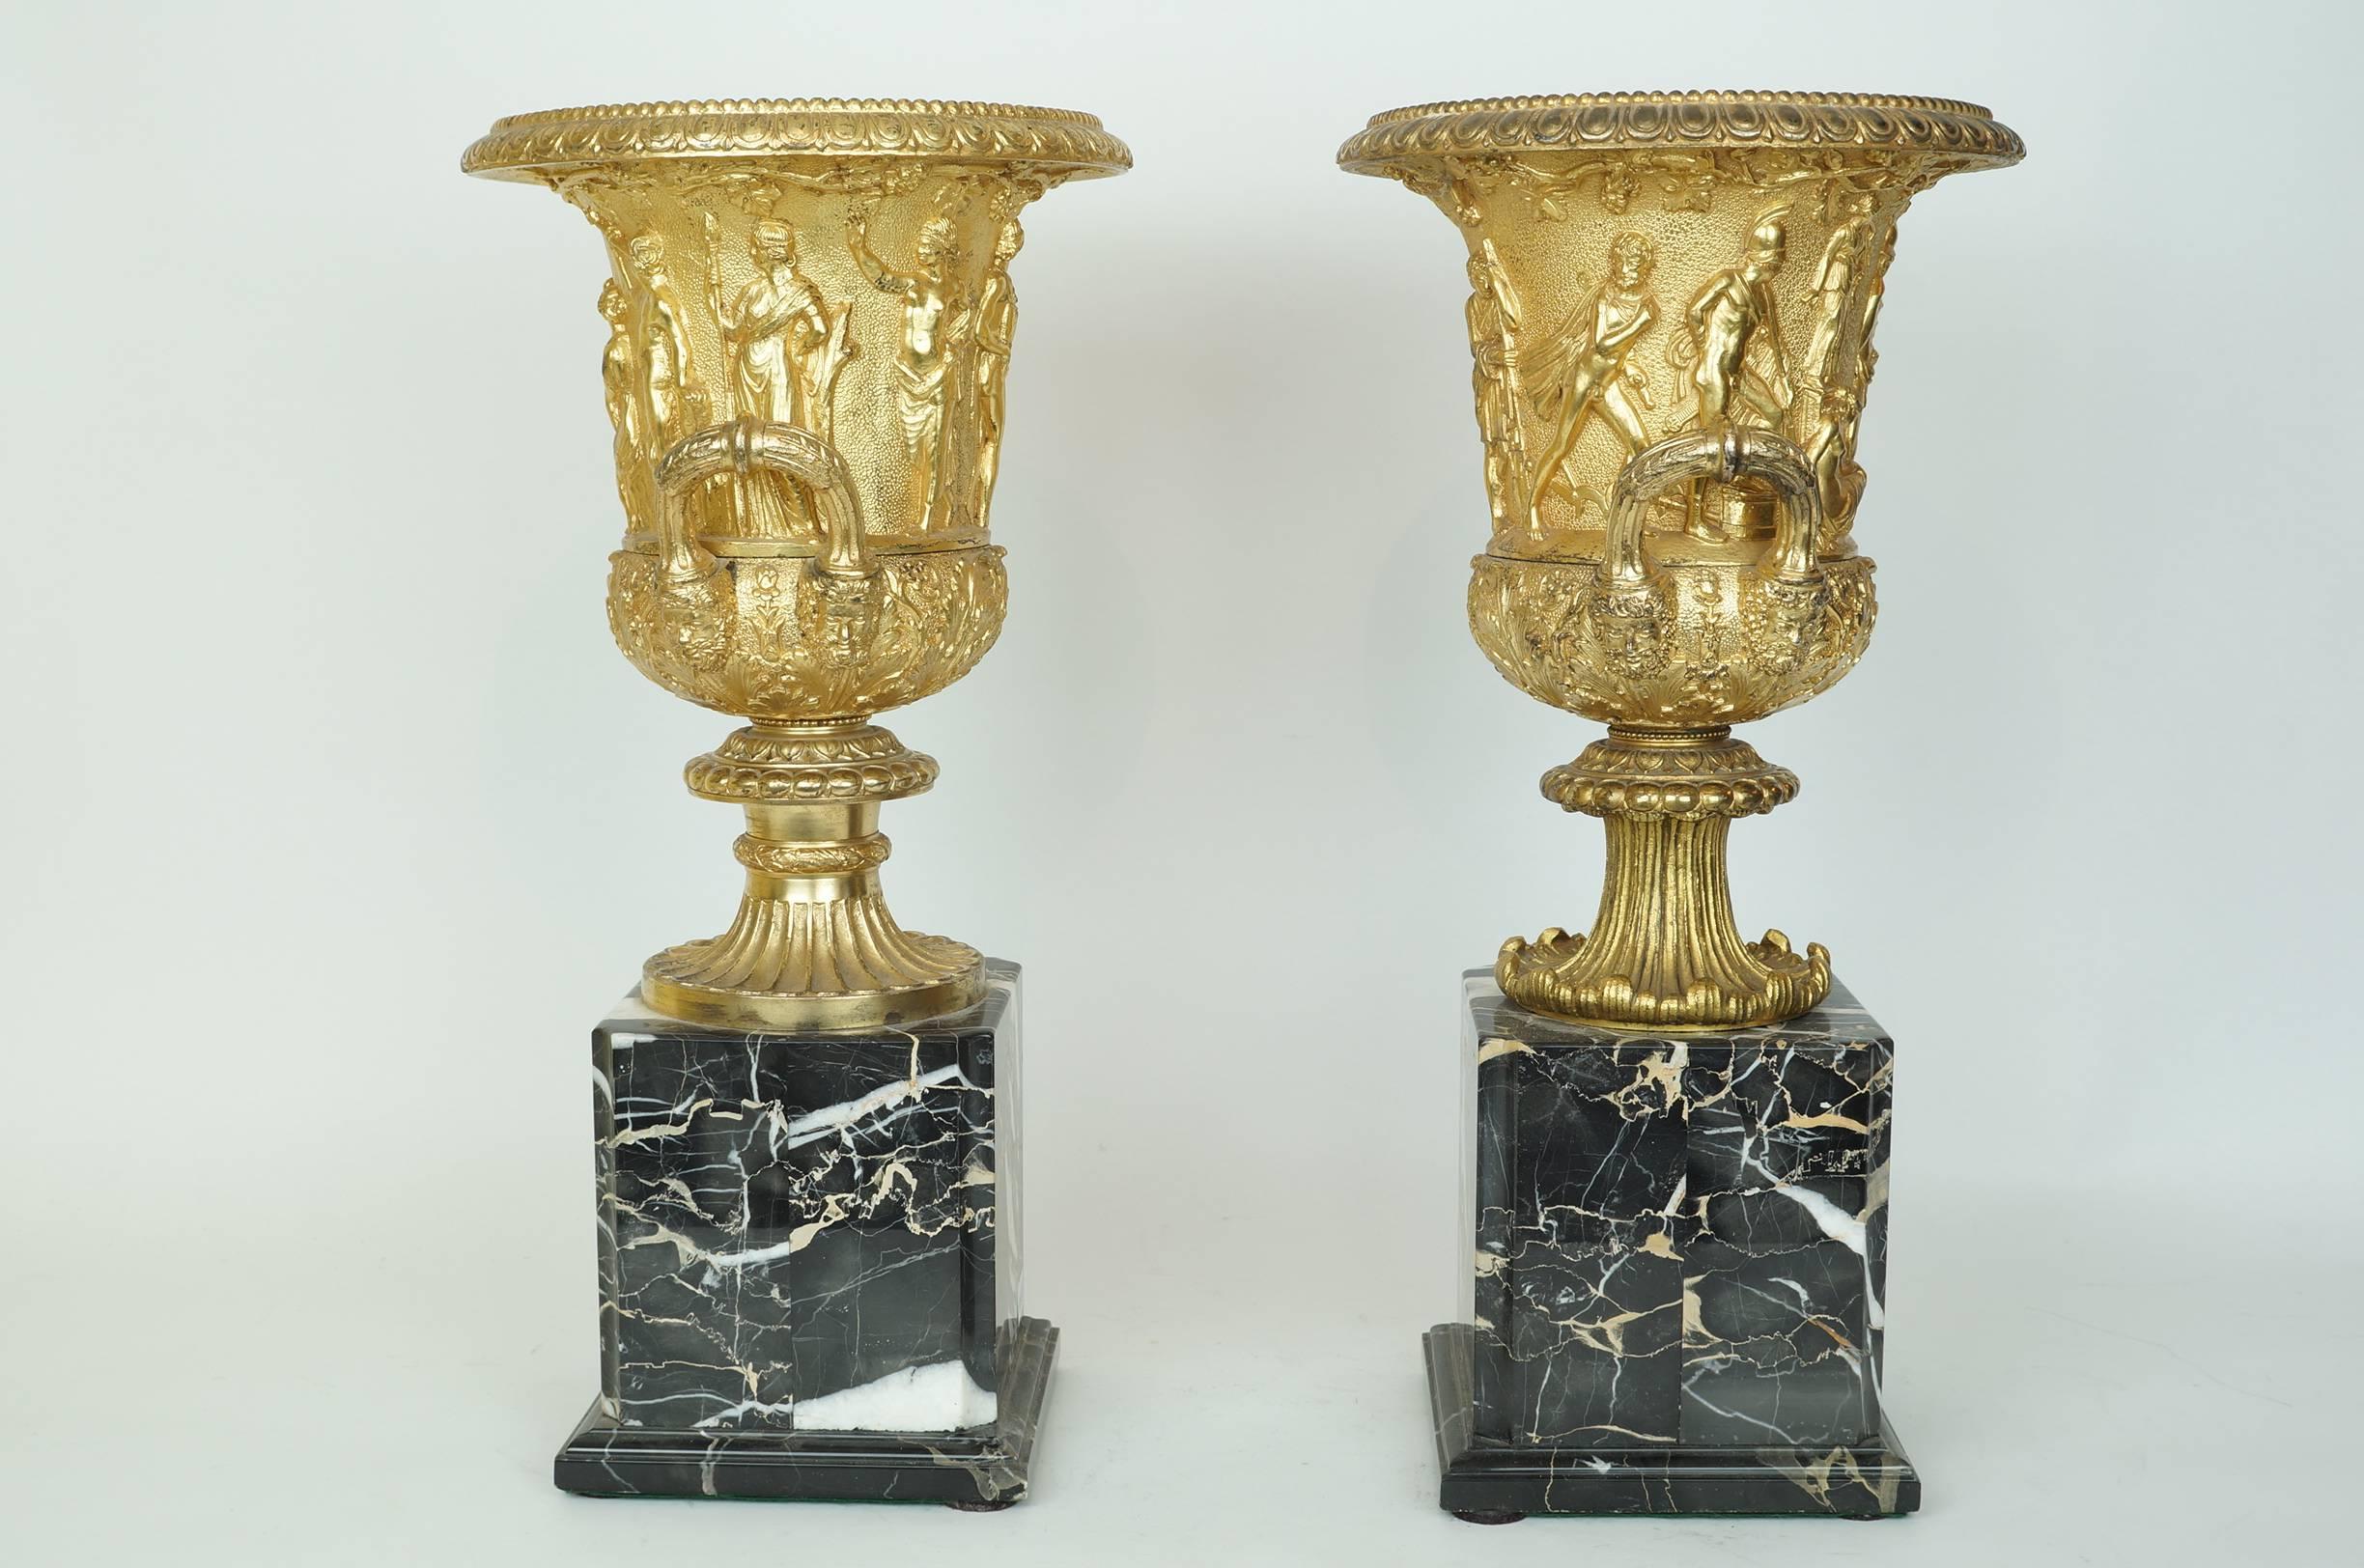 Pair of Neoclassical Gilt Bronze Figural Medici Style Urns on Marble Base 
Stock Number: DA129